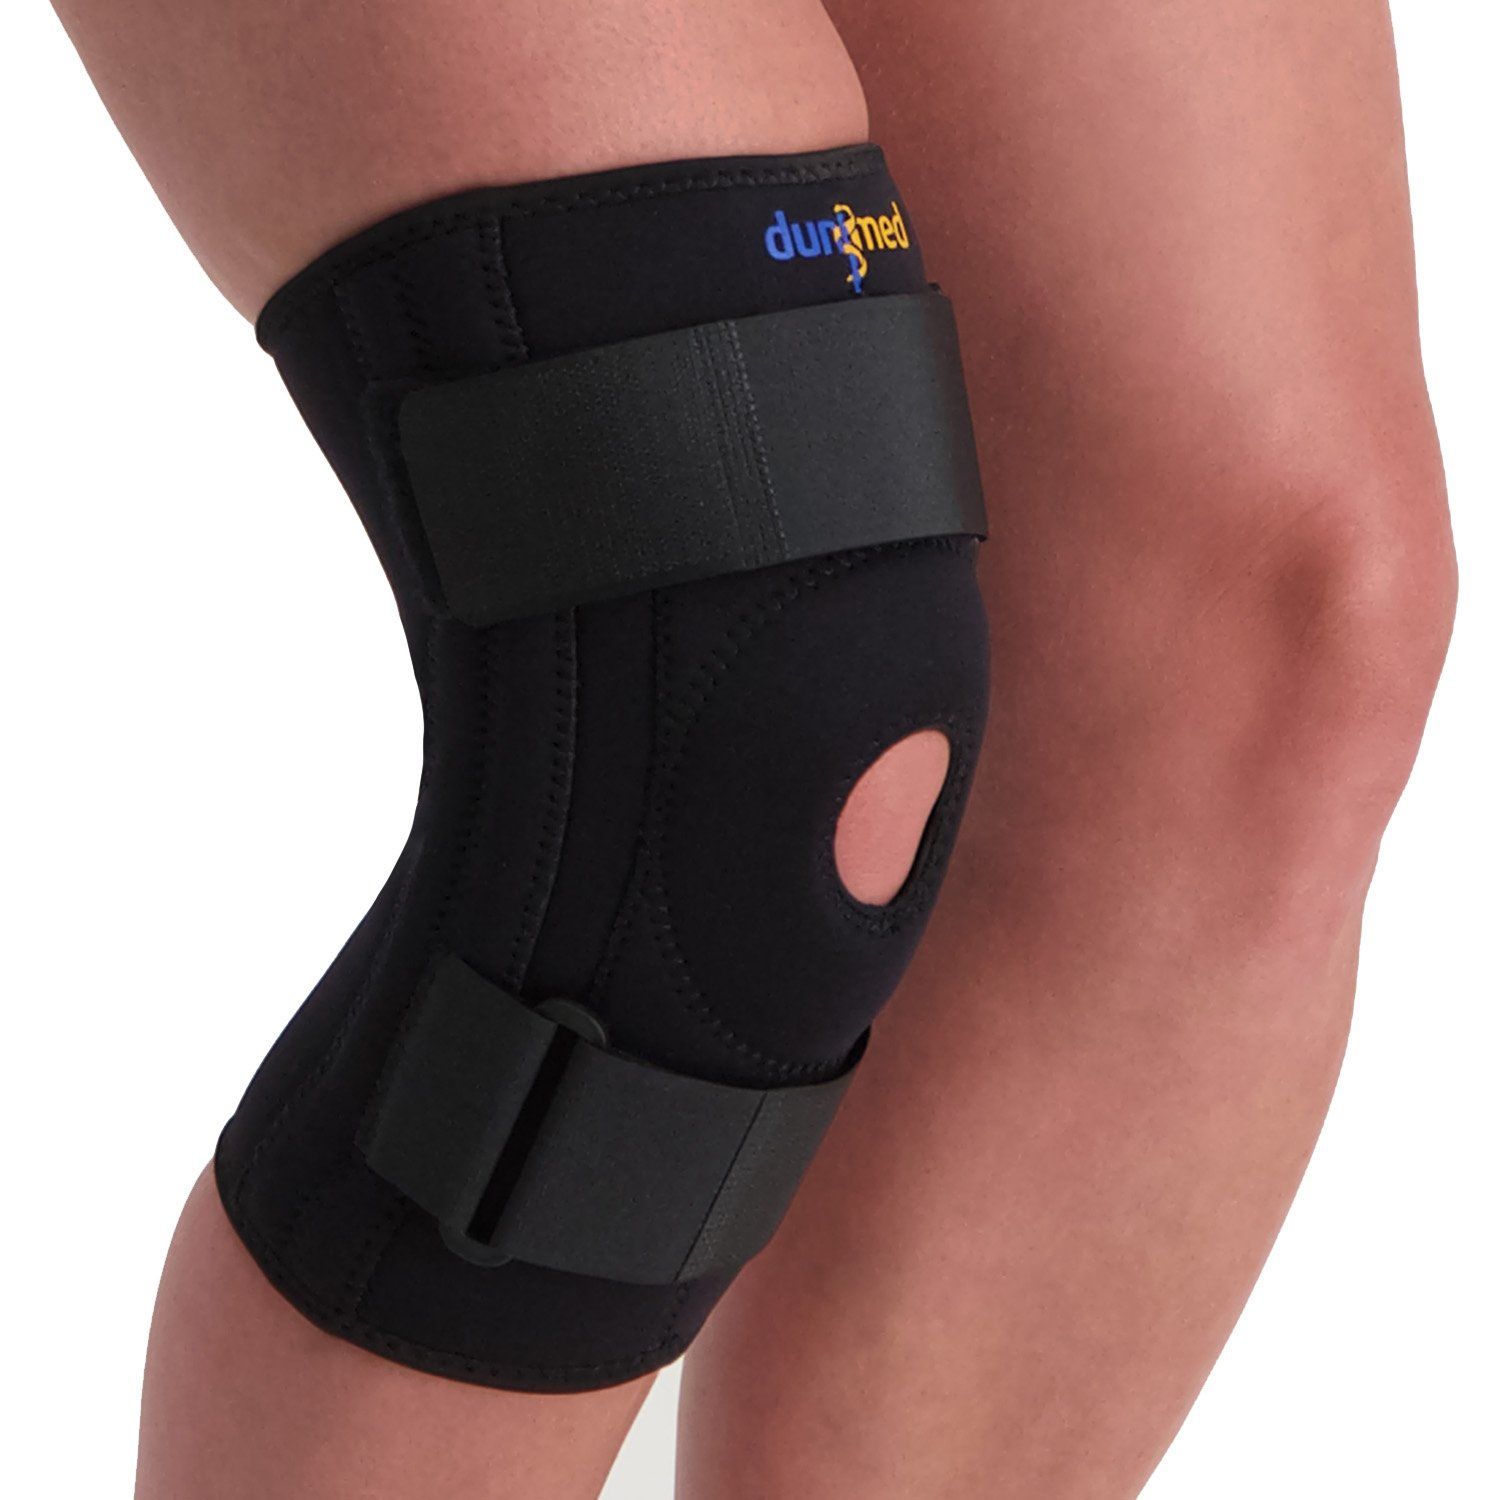 dunimed knee support with busks 